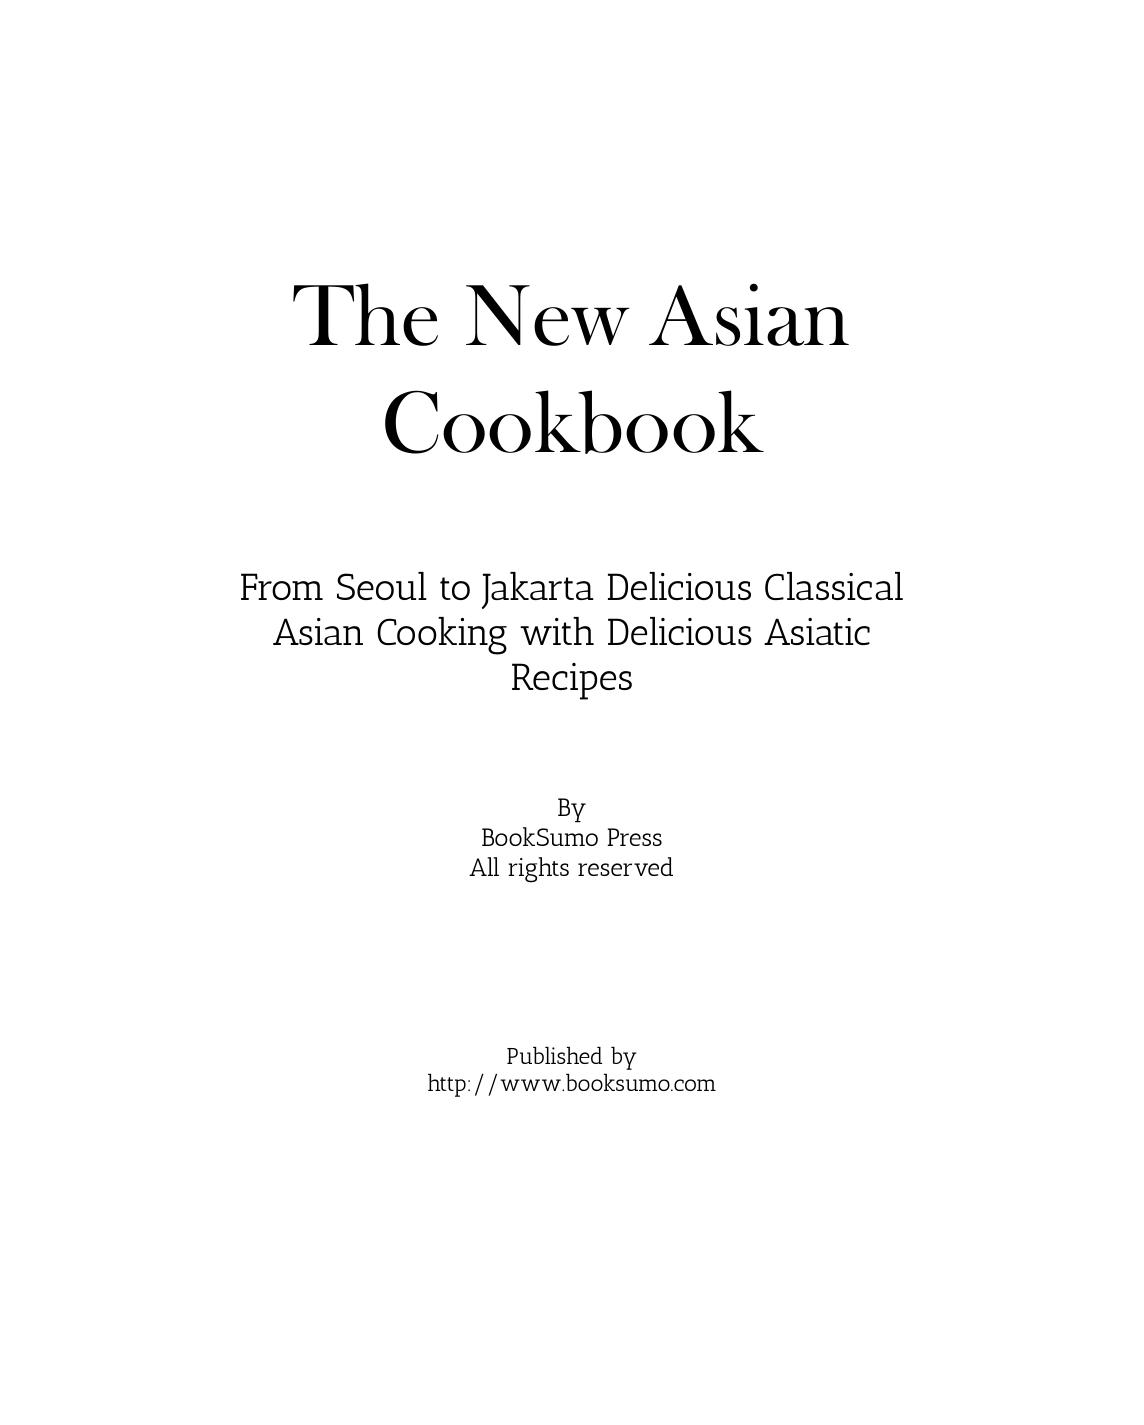 The New Asian Cookbook: From Seoul to Jakarta Discover Authentic Oriental Recipes by BookSumo Press